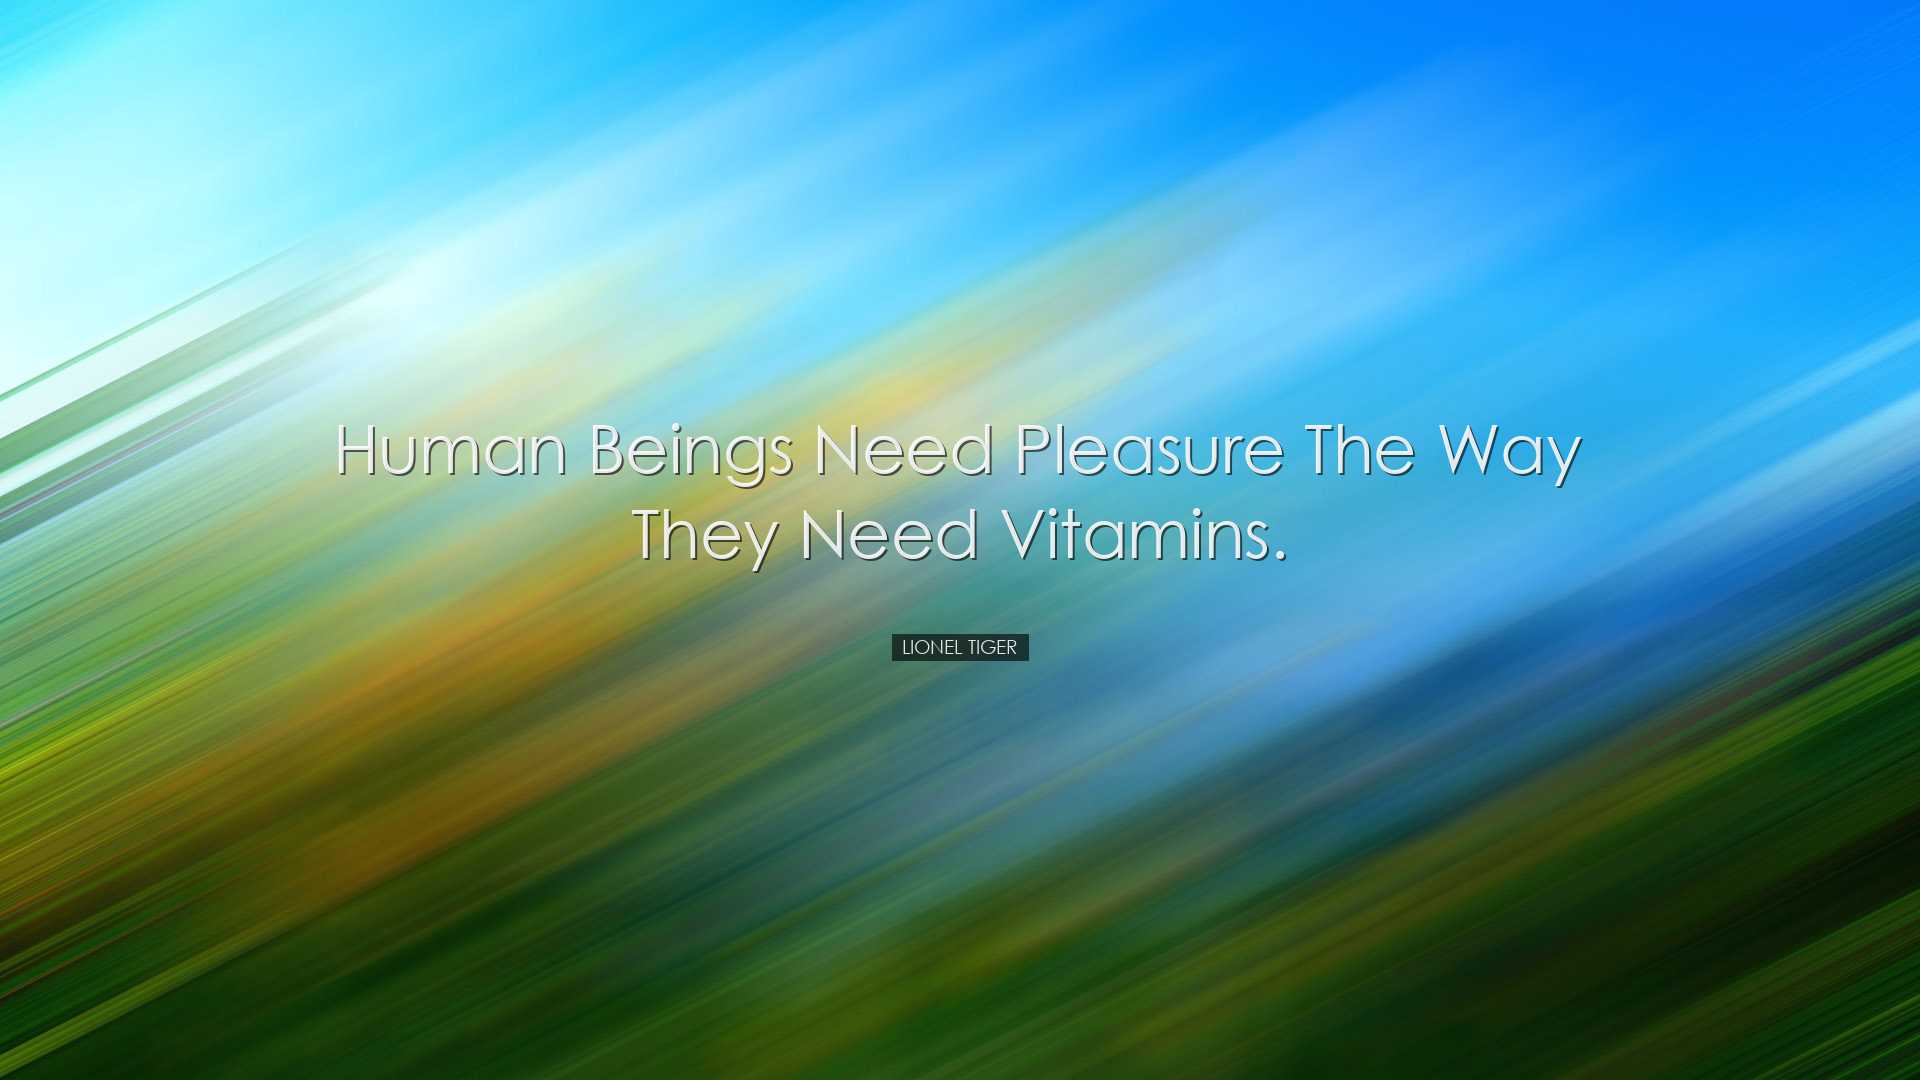 Human beings need pleasure the way they need vitamins. - Lionel Ti